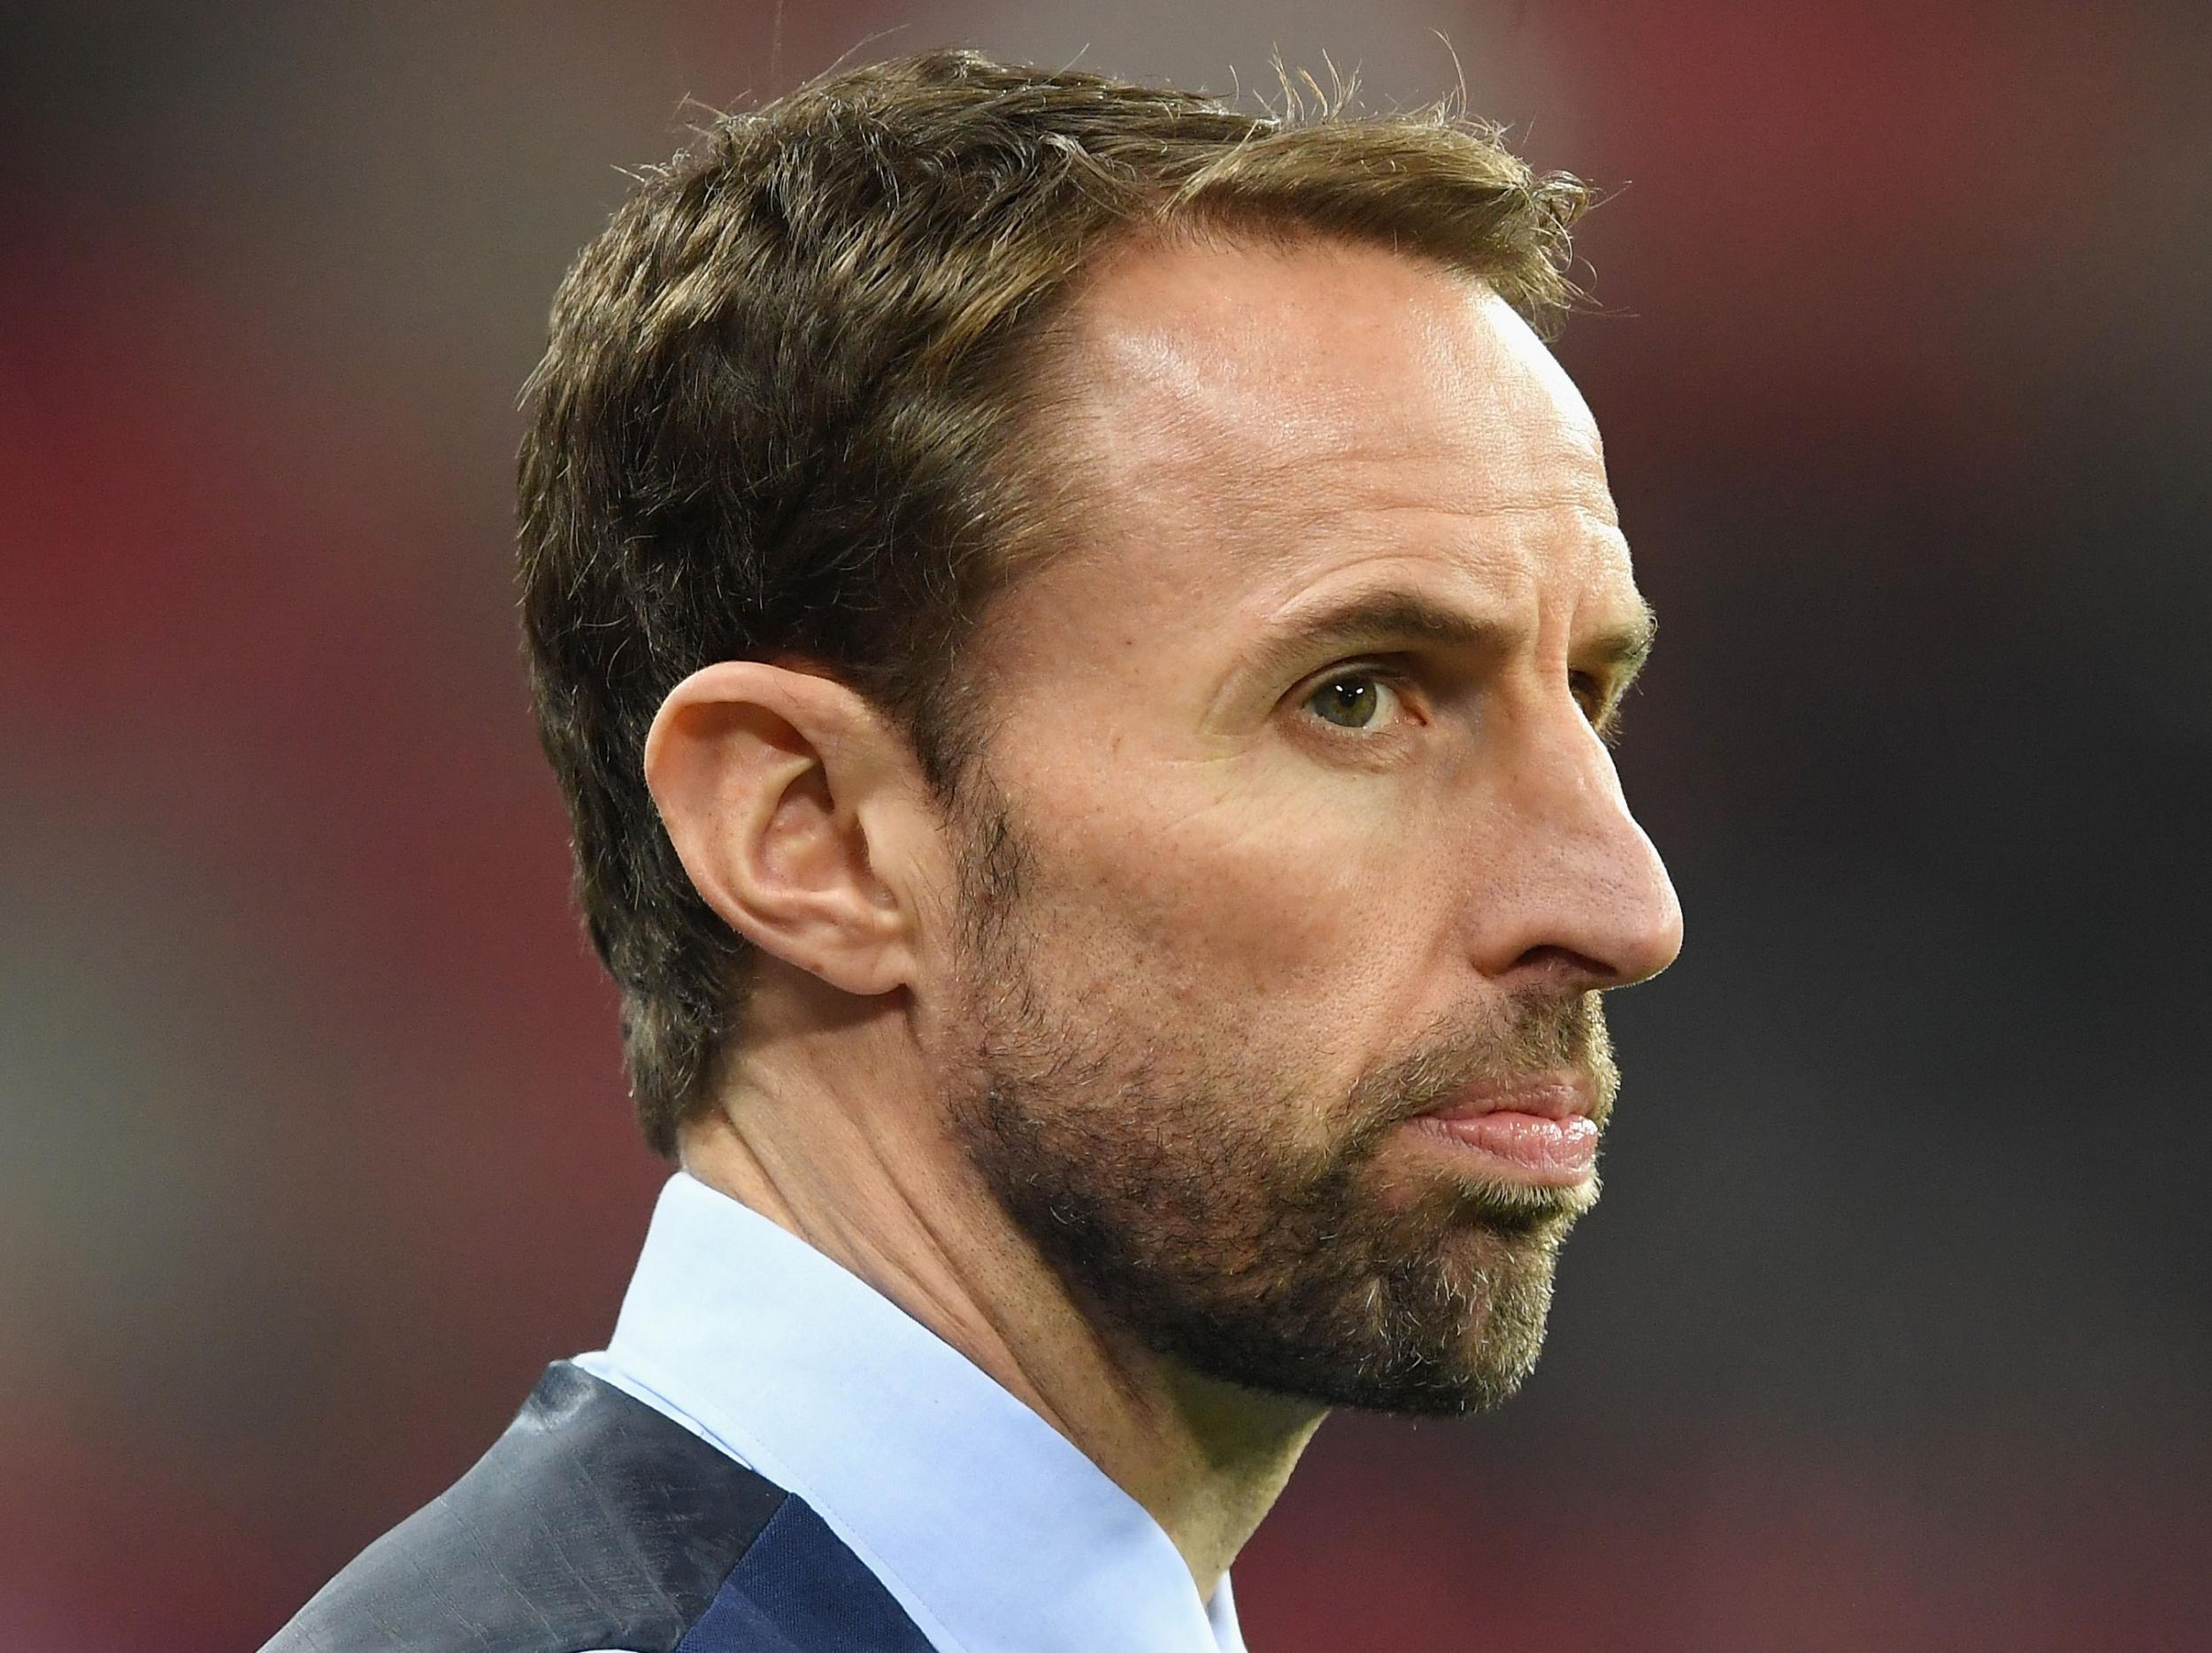 &#13;
Southgate?is expected to incorporate England's emerging talent into the senior side &#13;